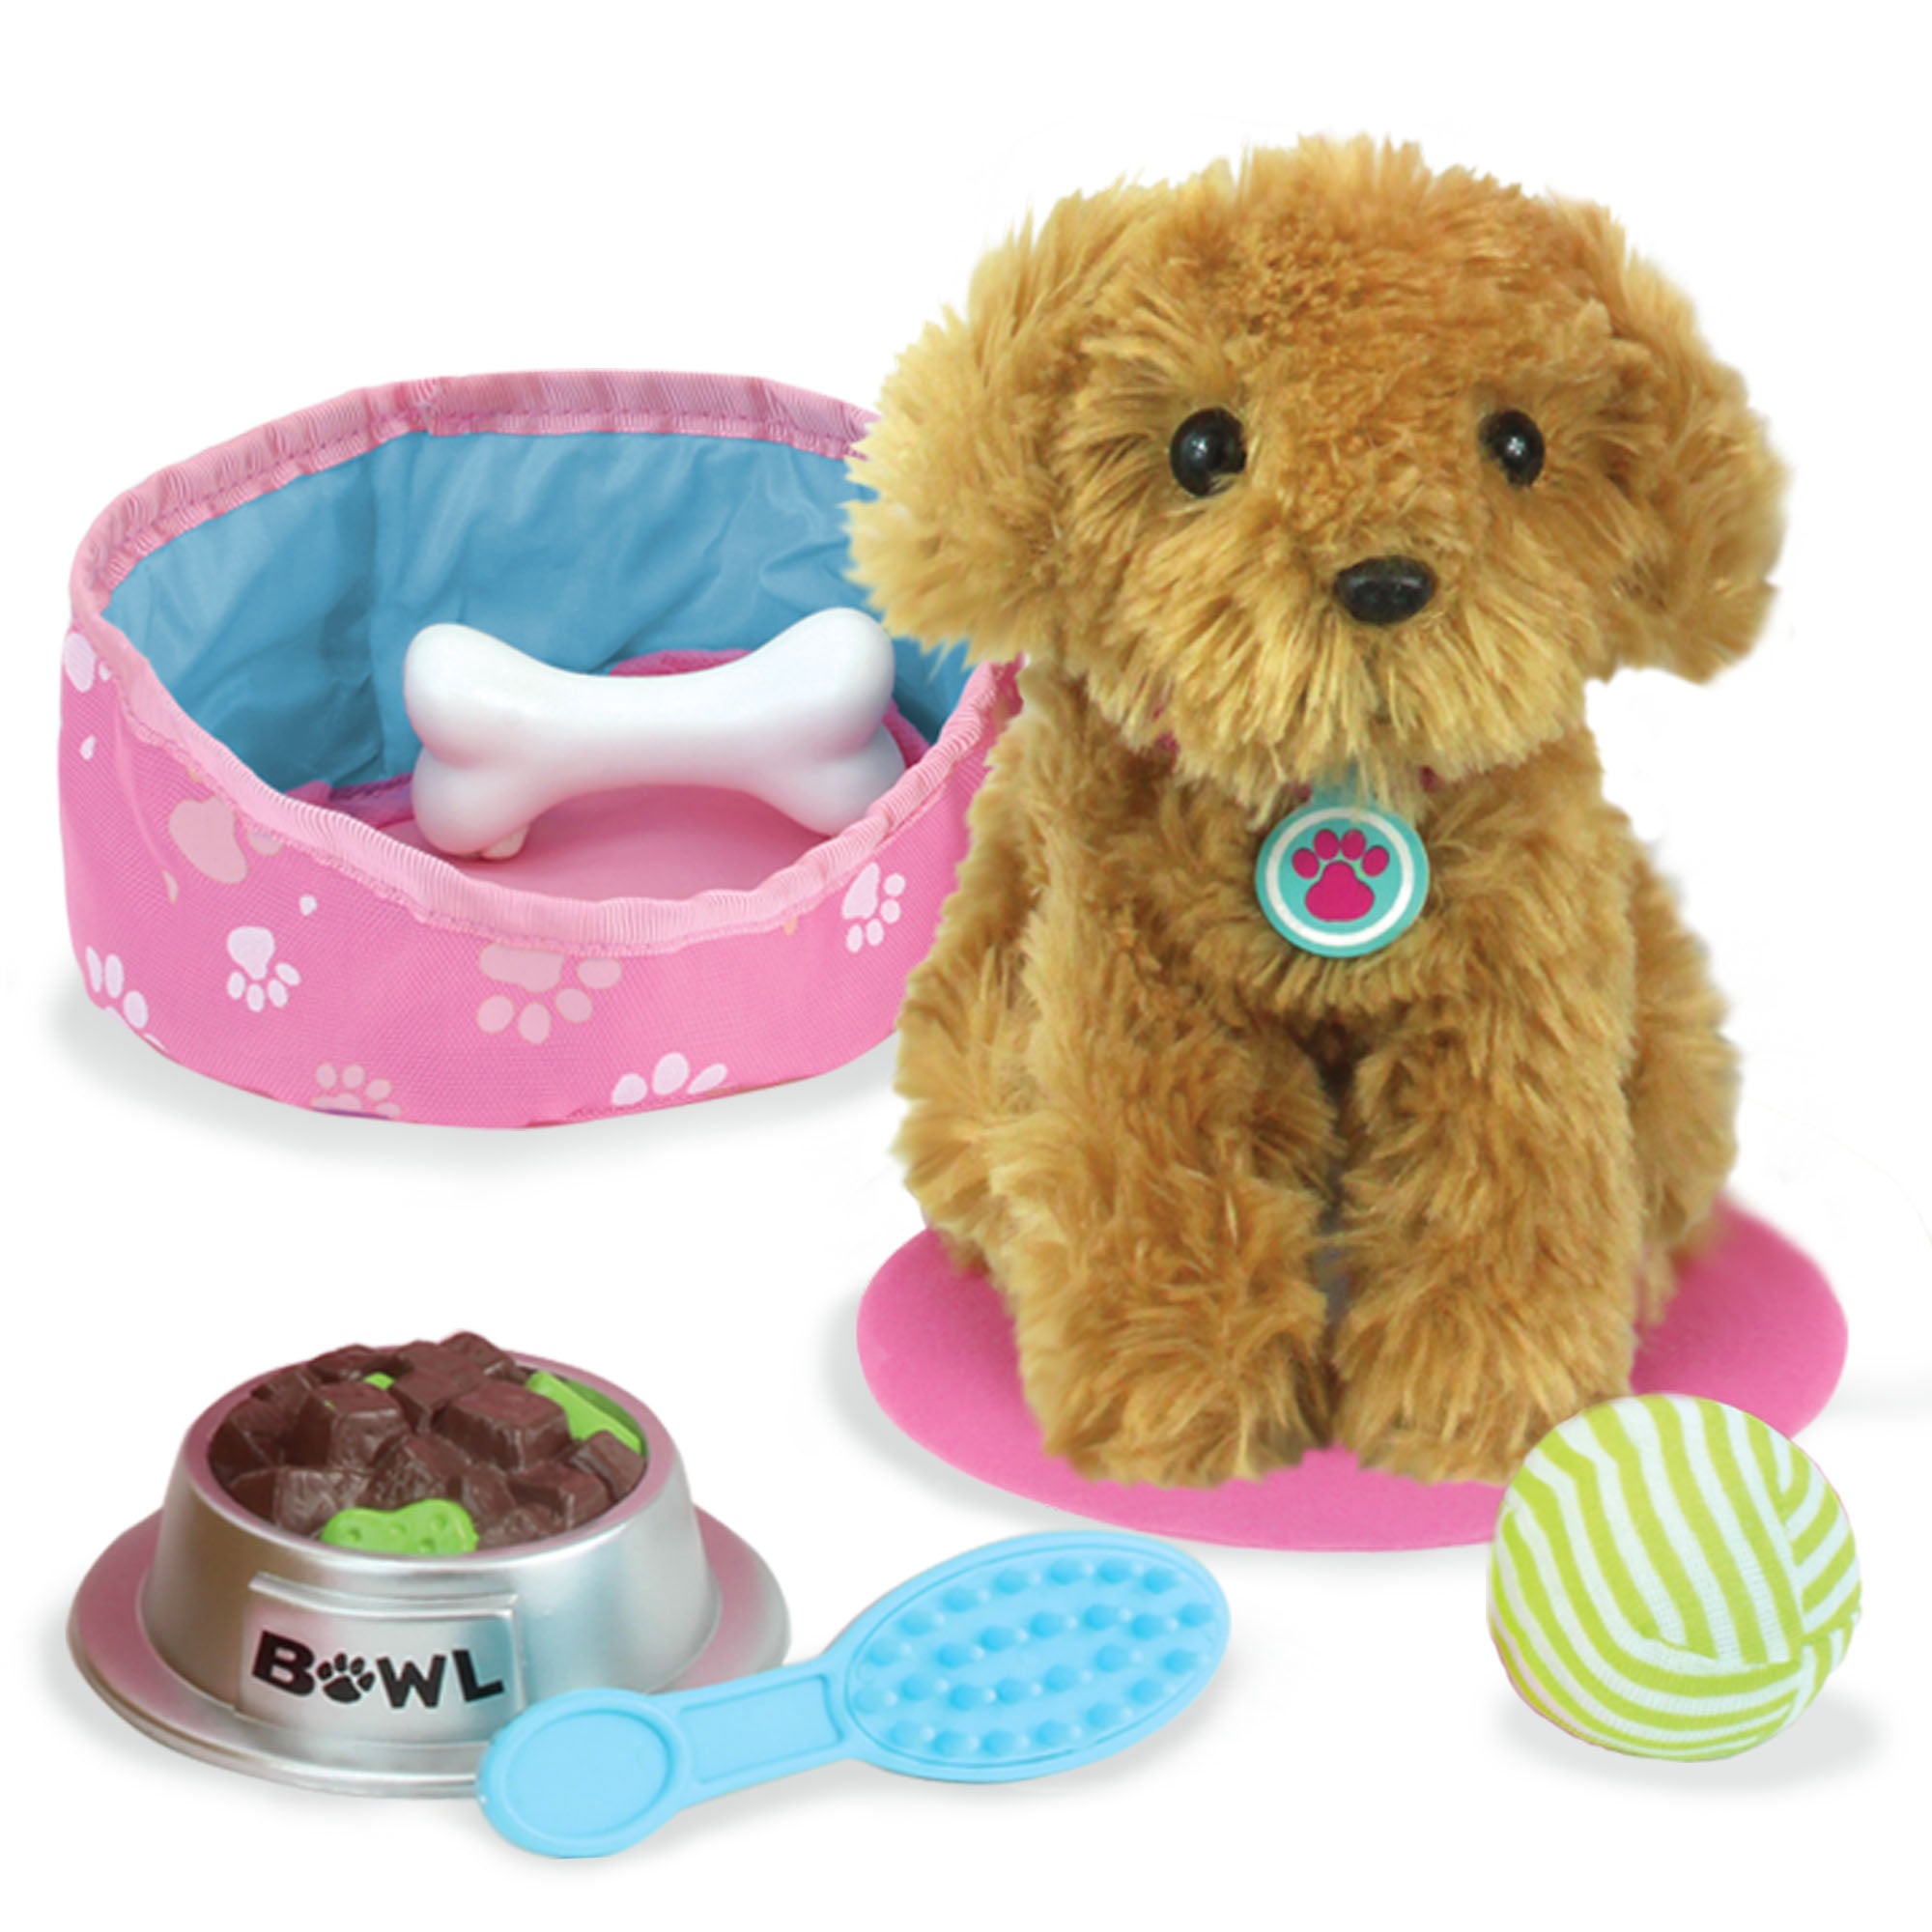 Sophia’s Plush Puppy and Accessories Set for 18" Dolls